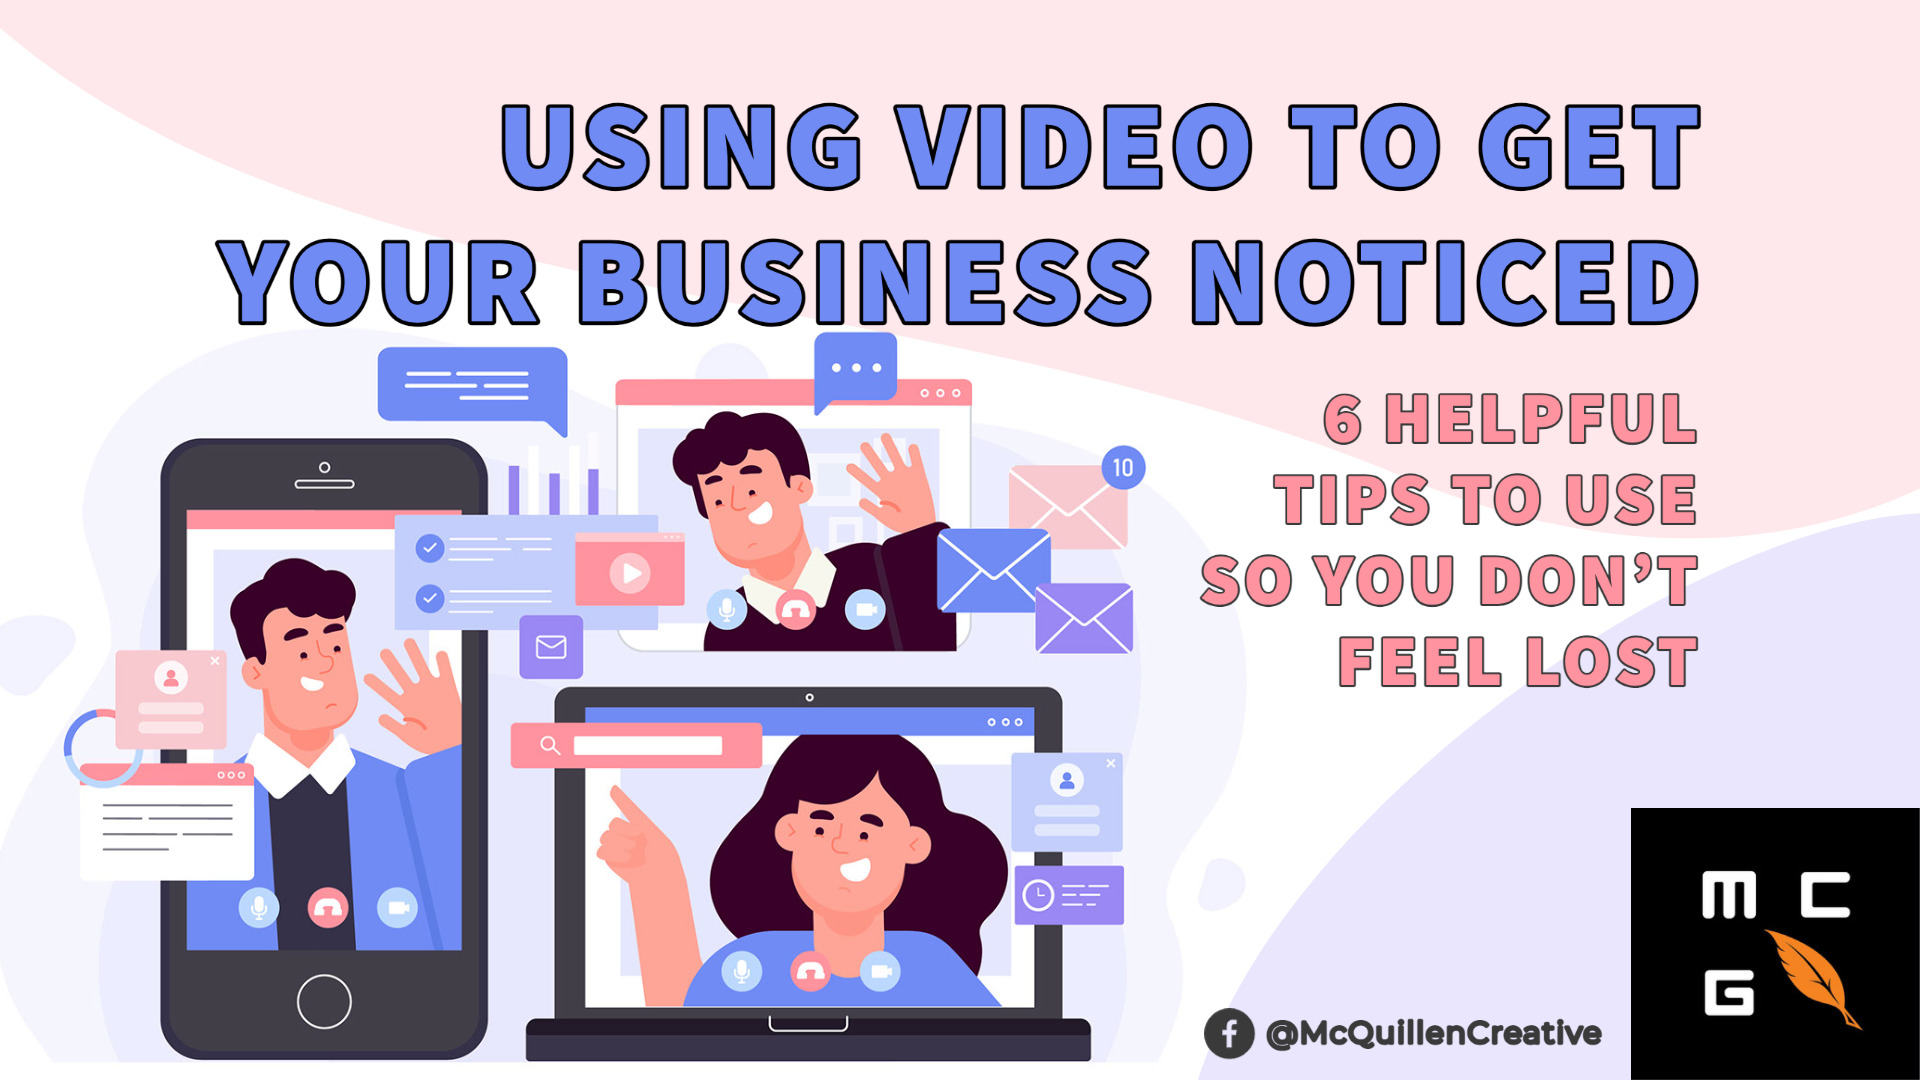 Business video ideas worth thinking about.